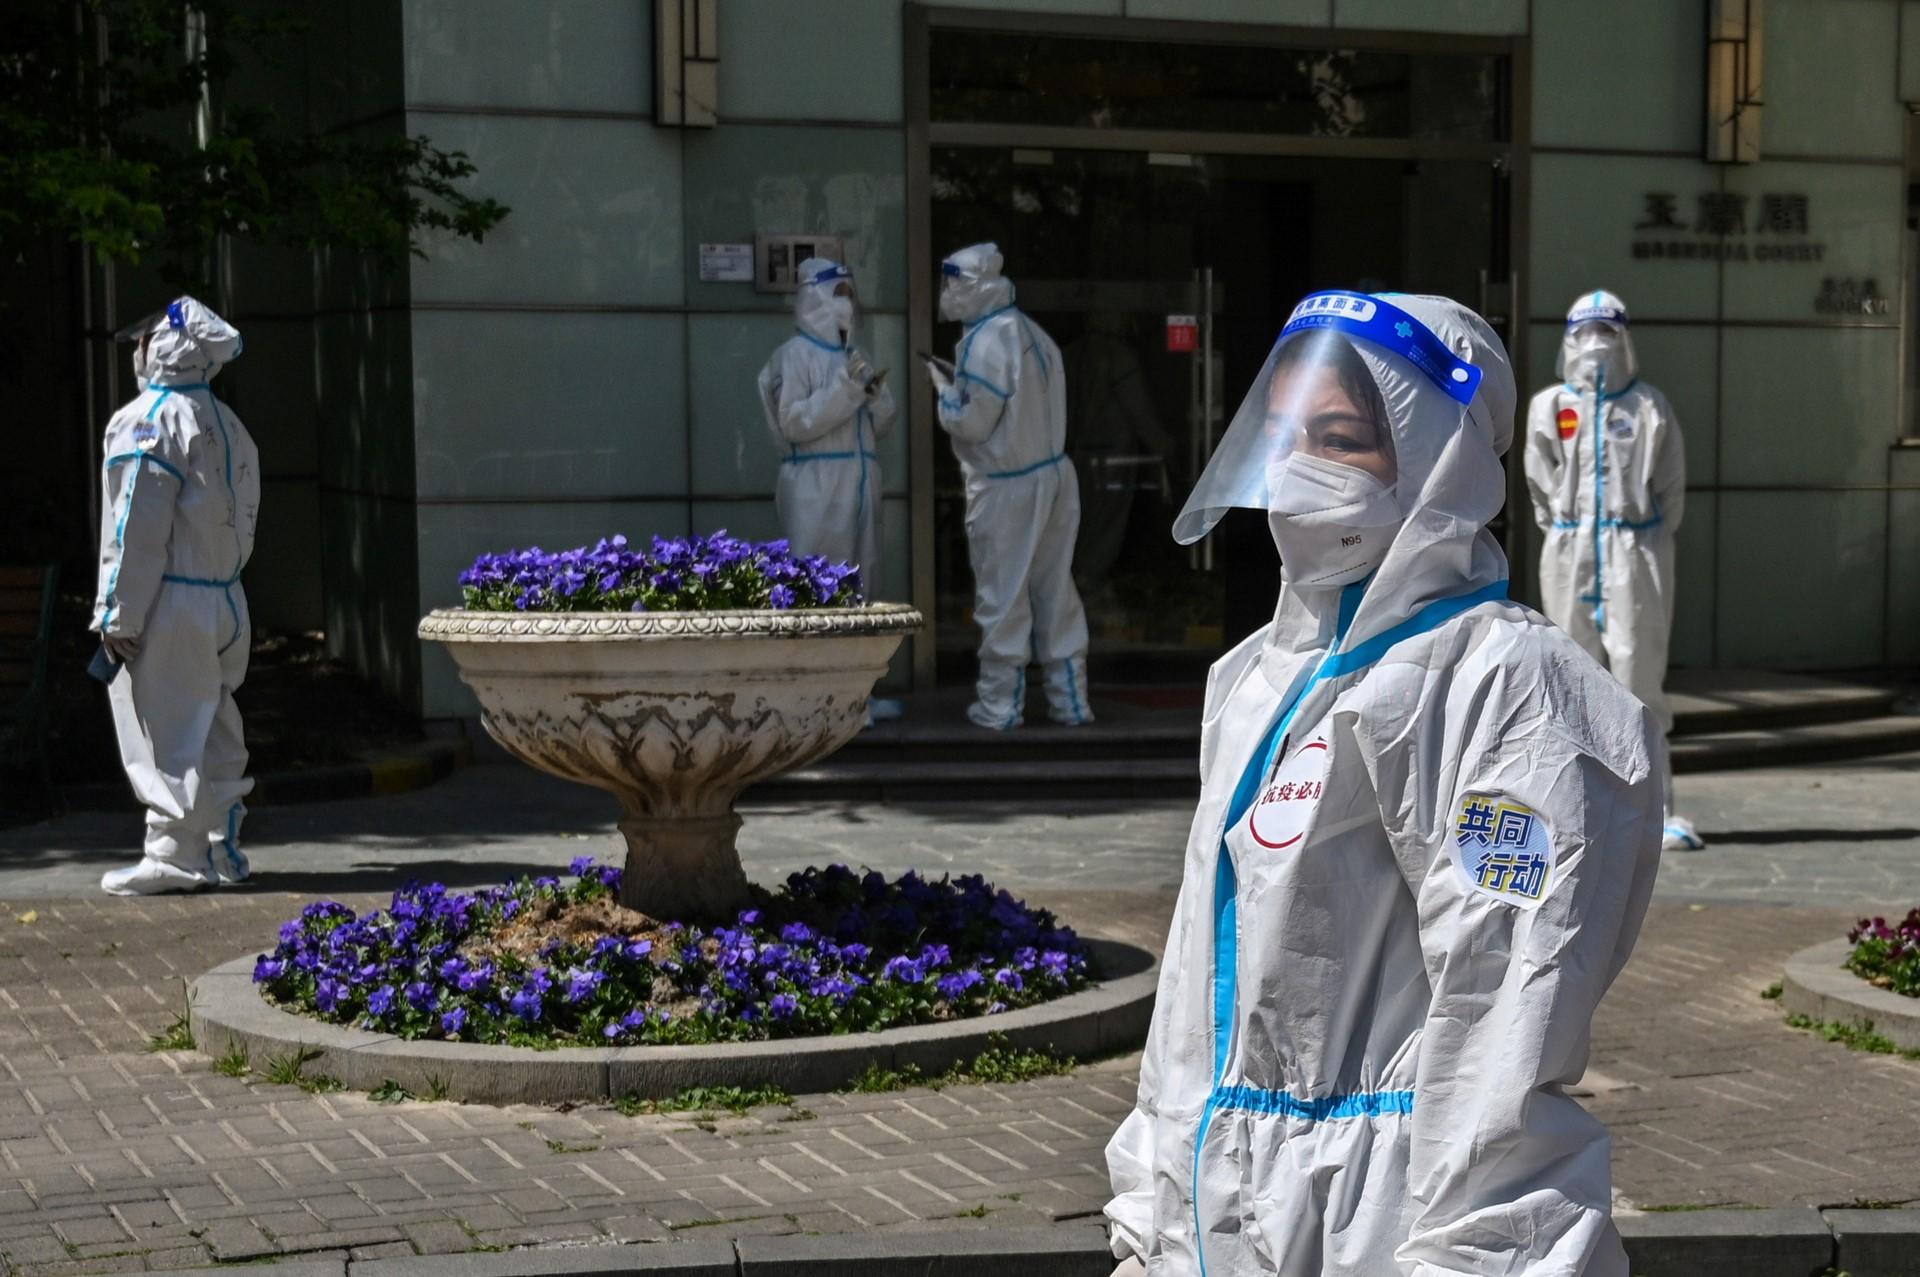 Workers and volunteers look on in a compound where residents are tested for Covid-19 during the second stage of a pandemic lockdown in the Jing'an district in Shanghai on April 4. Photo: AFP